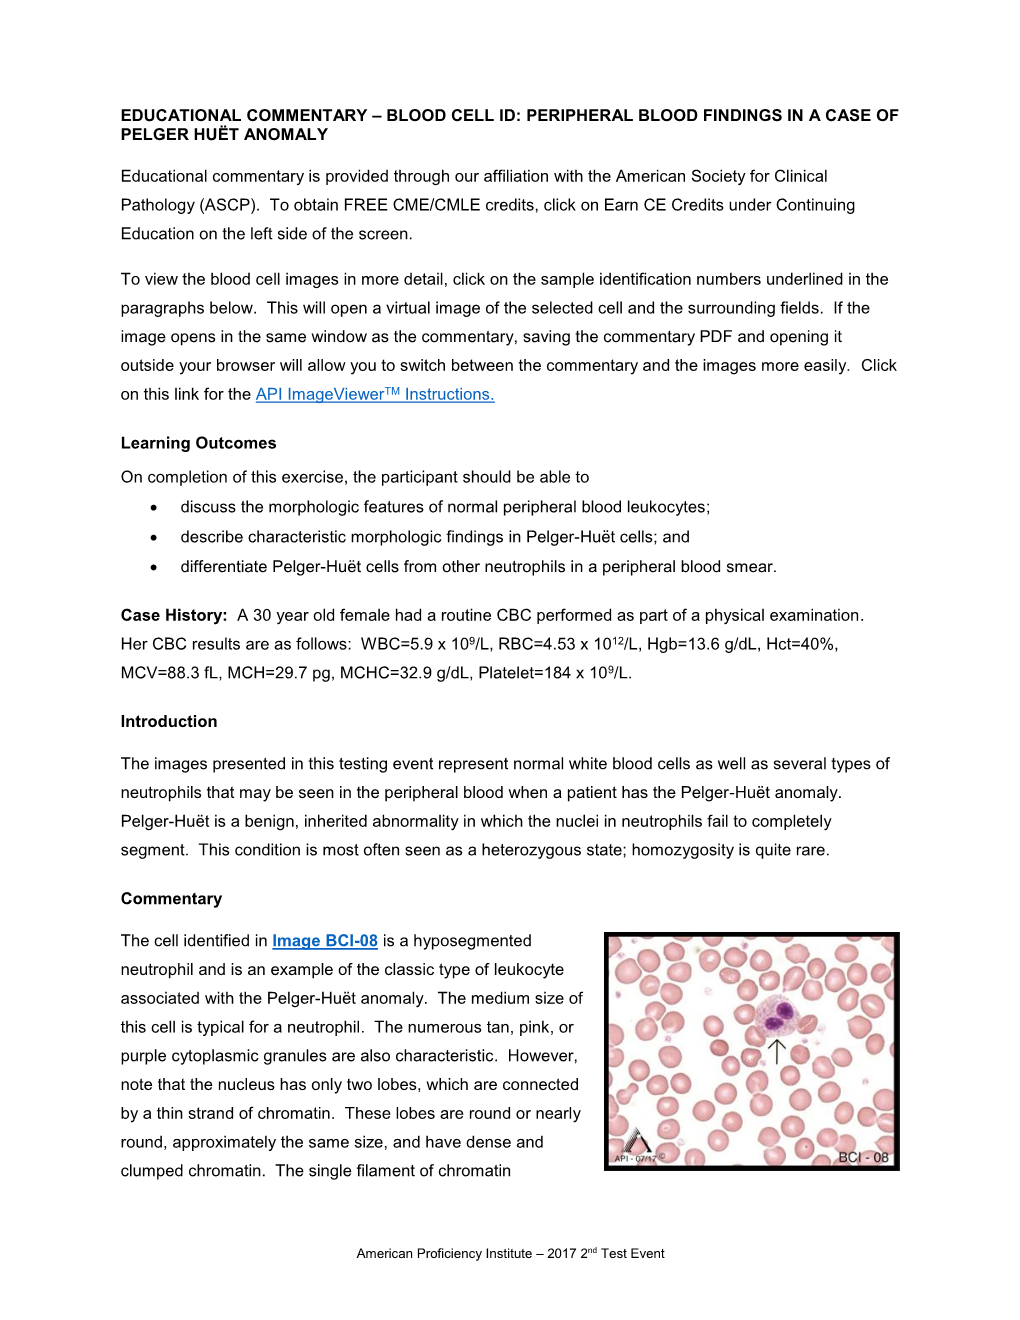 Educational Commentary – Blood Cell Id: Peripheral Blood Findings in a Case of Pelger Huët Anomaly